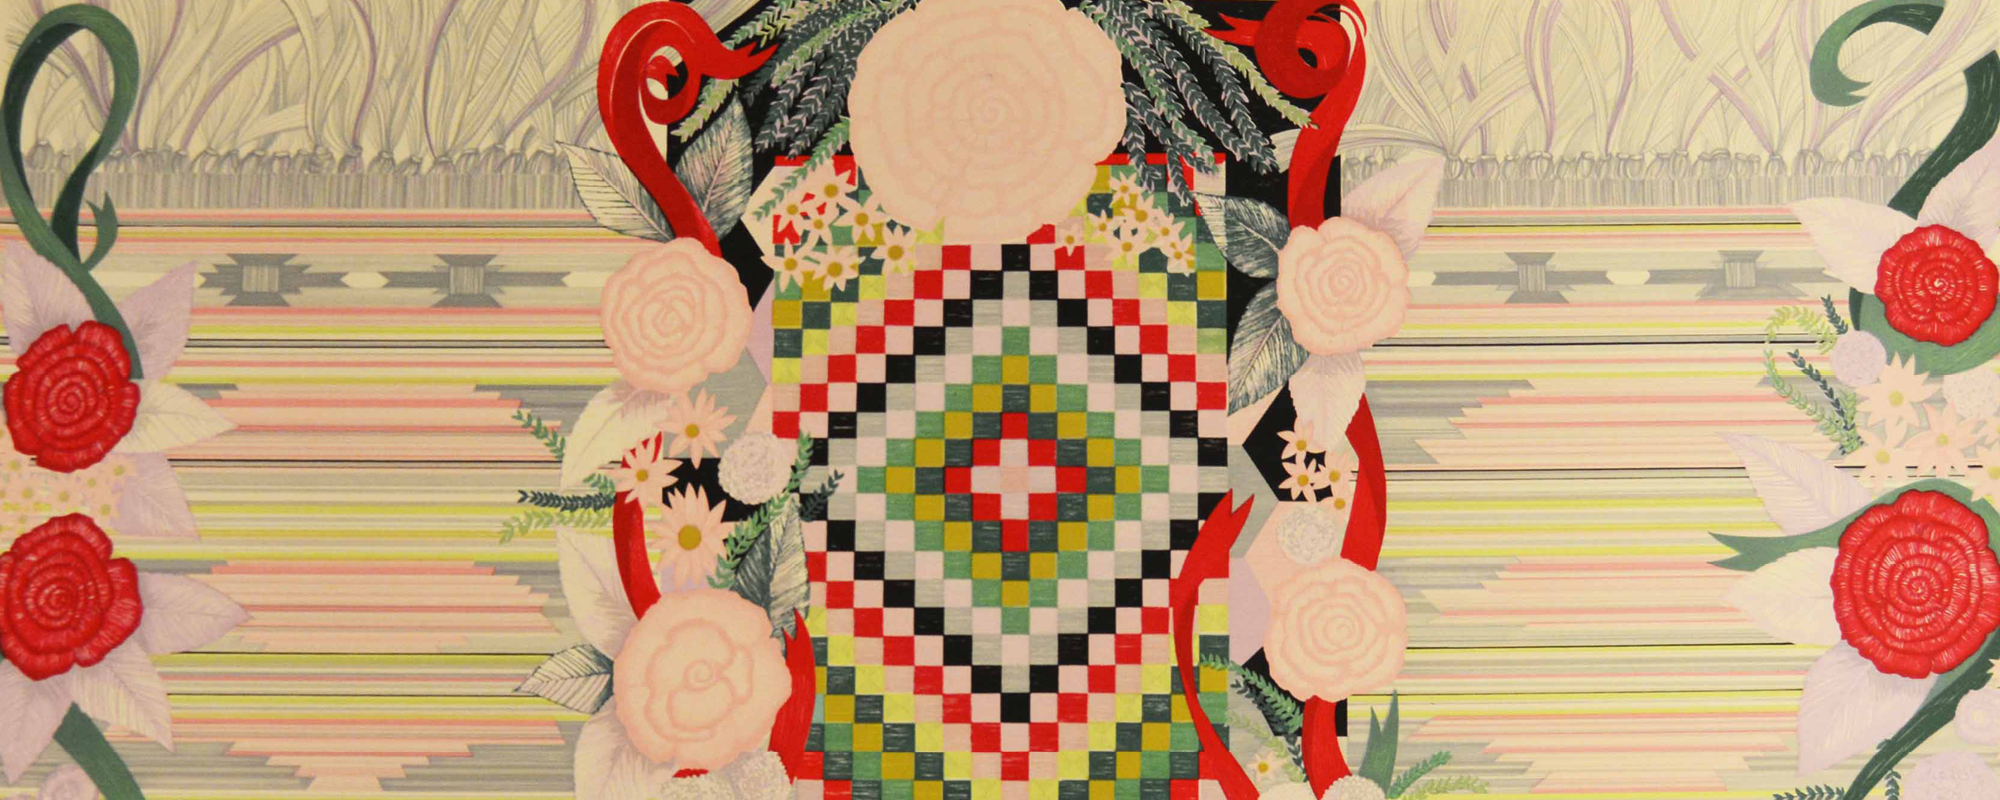 Watercolor and pen/graphite drawing on thick white/off white paper. Diamond, quilt design at the center running vertically is framed by roses in pink and red and ribbon in red and green. Flanking center images are blanket designs in shades of light pink, yellow and light green. These areas are also bordered with drawings of roses in pink and red and ribbon in red and green.